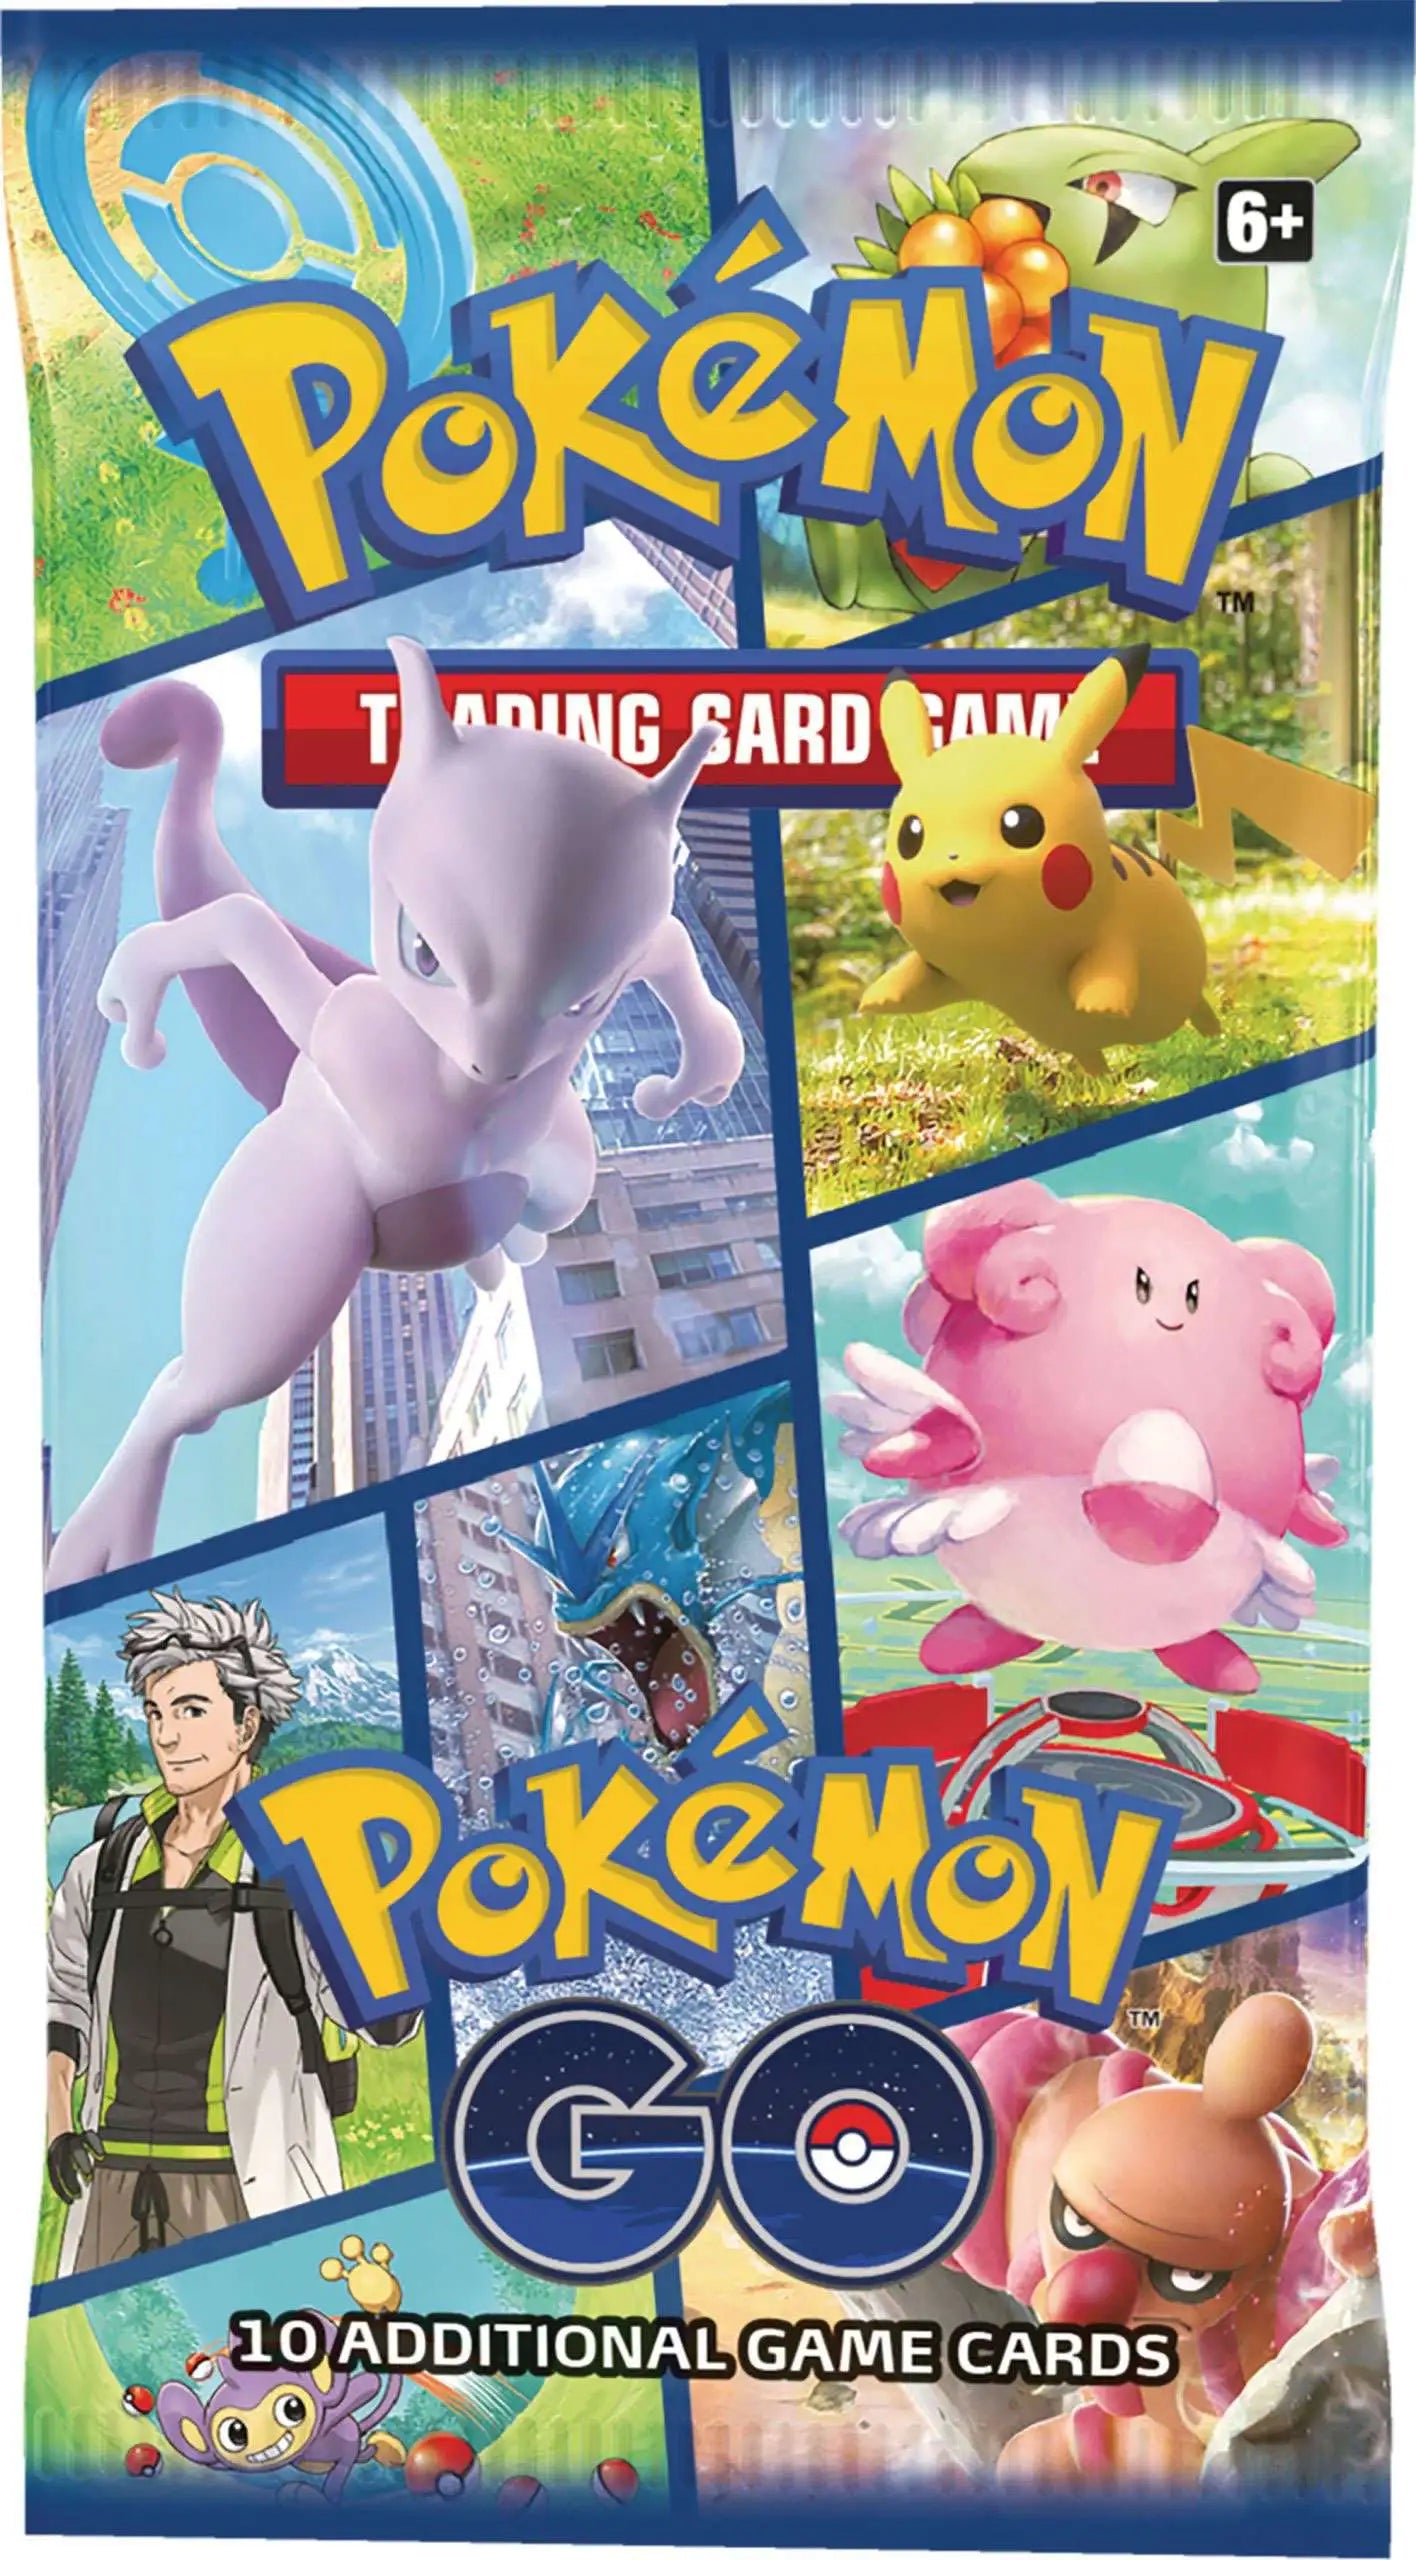 Pokemon TCG Trading Card Game Online code cards (12 count) Digital Delivery